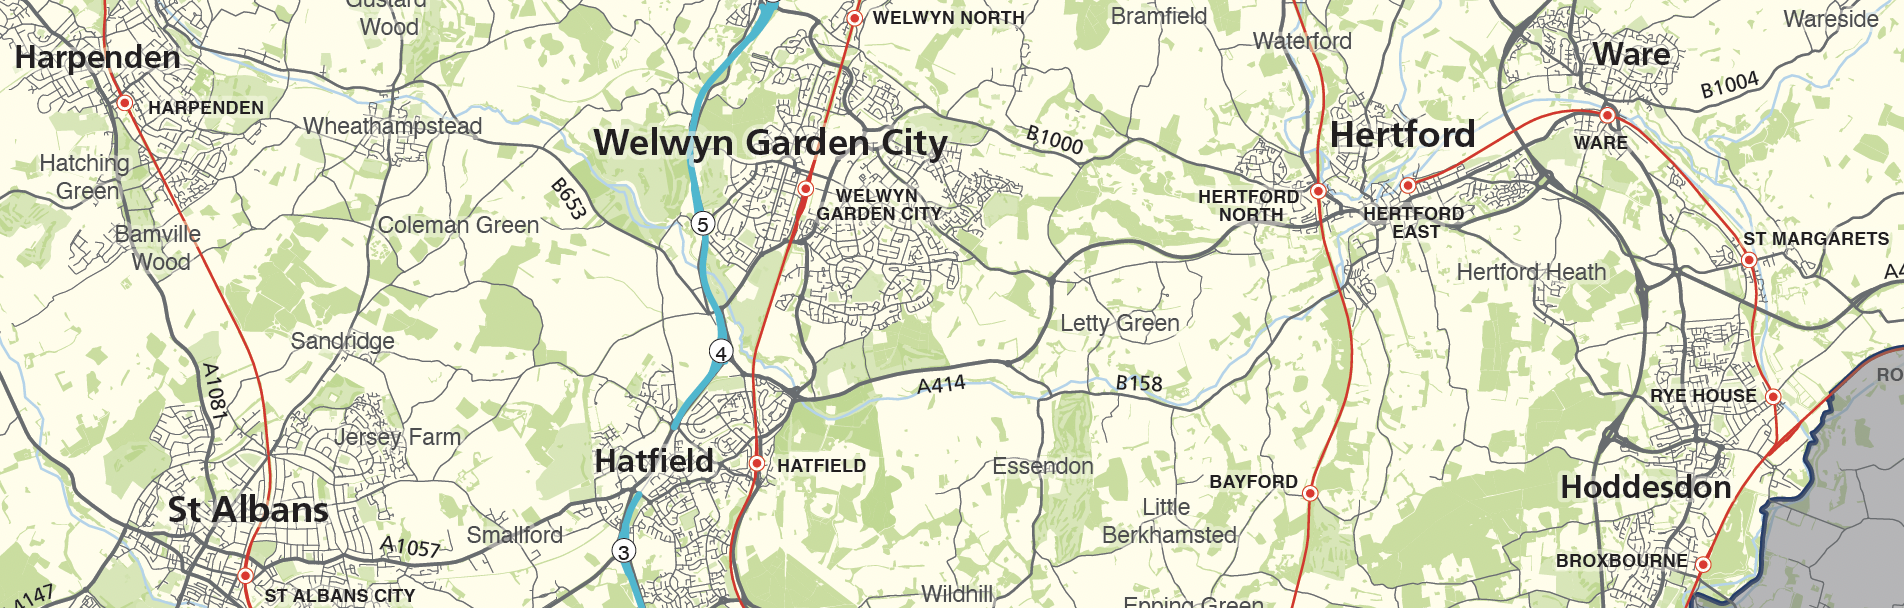 Detail from Hertfordshire county map